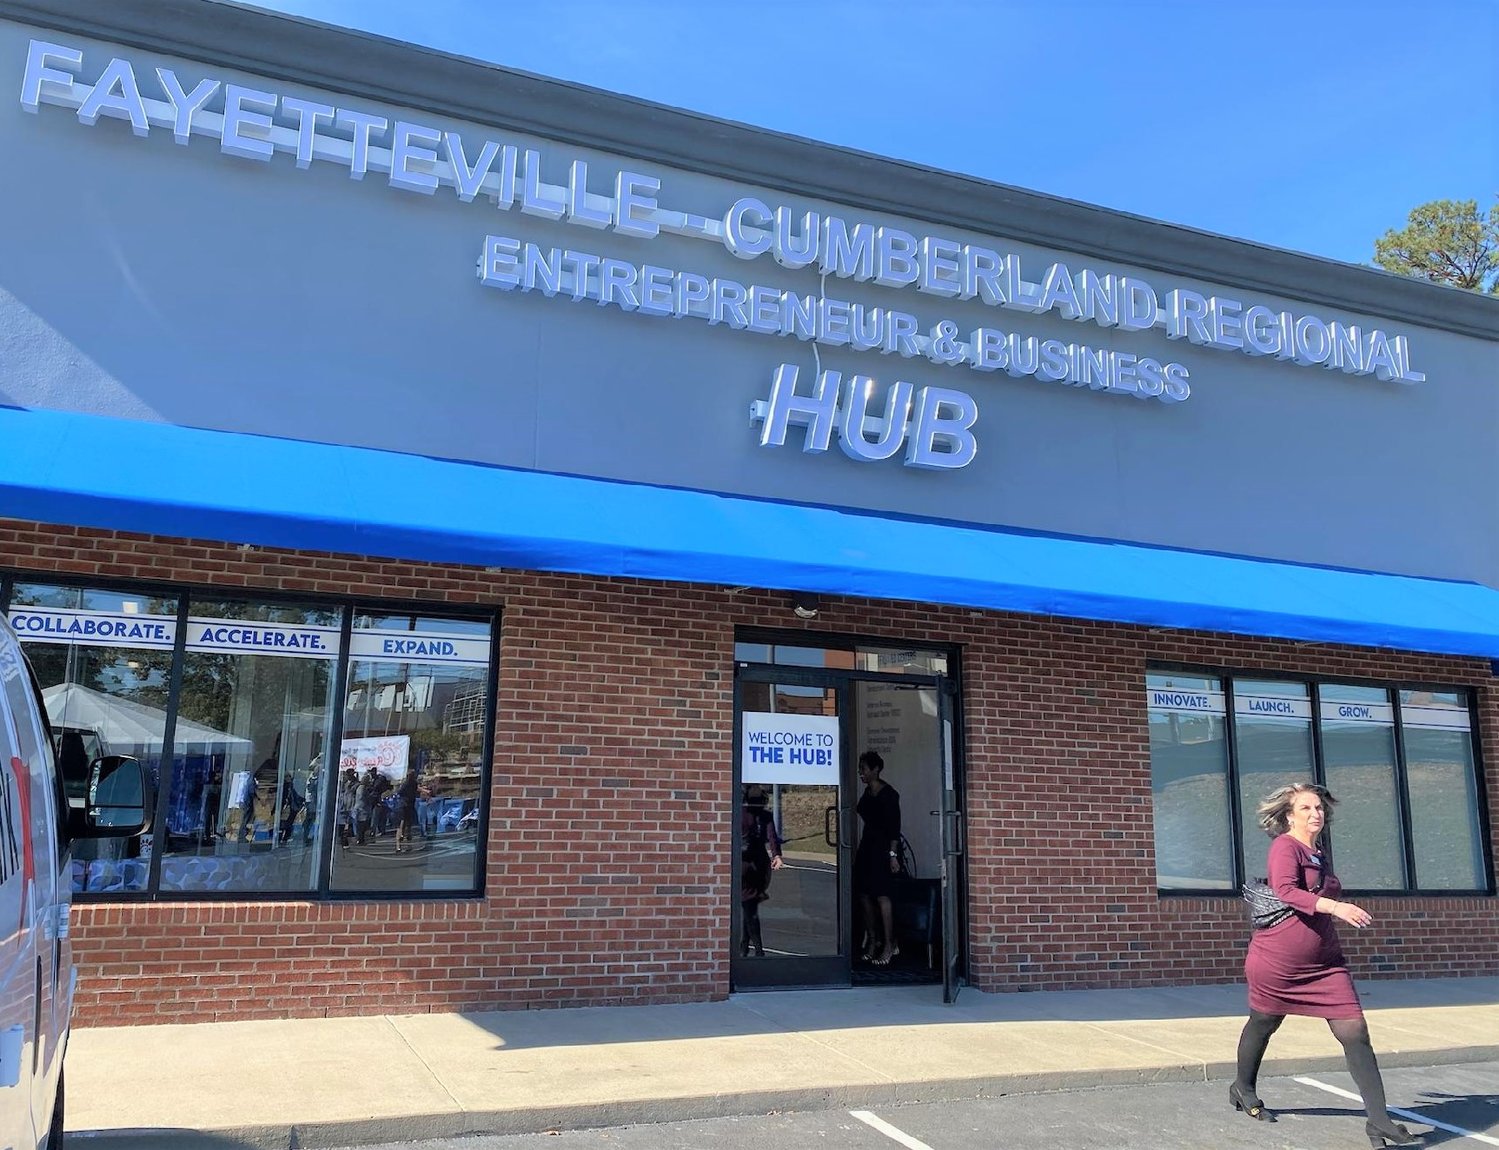 The Fayetteville-Cumberland Regional Entrepreneur & Business Hub is among the tenants at the renamed Bronco Midtown business center.